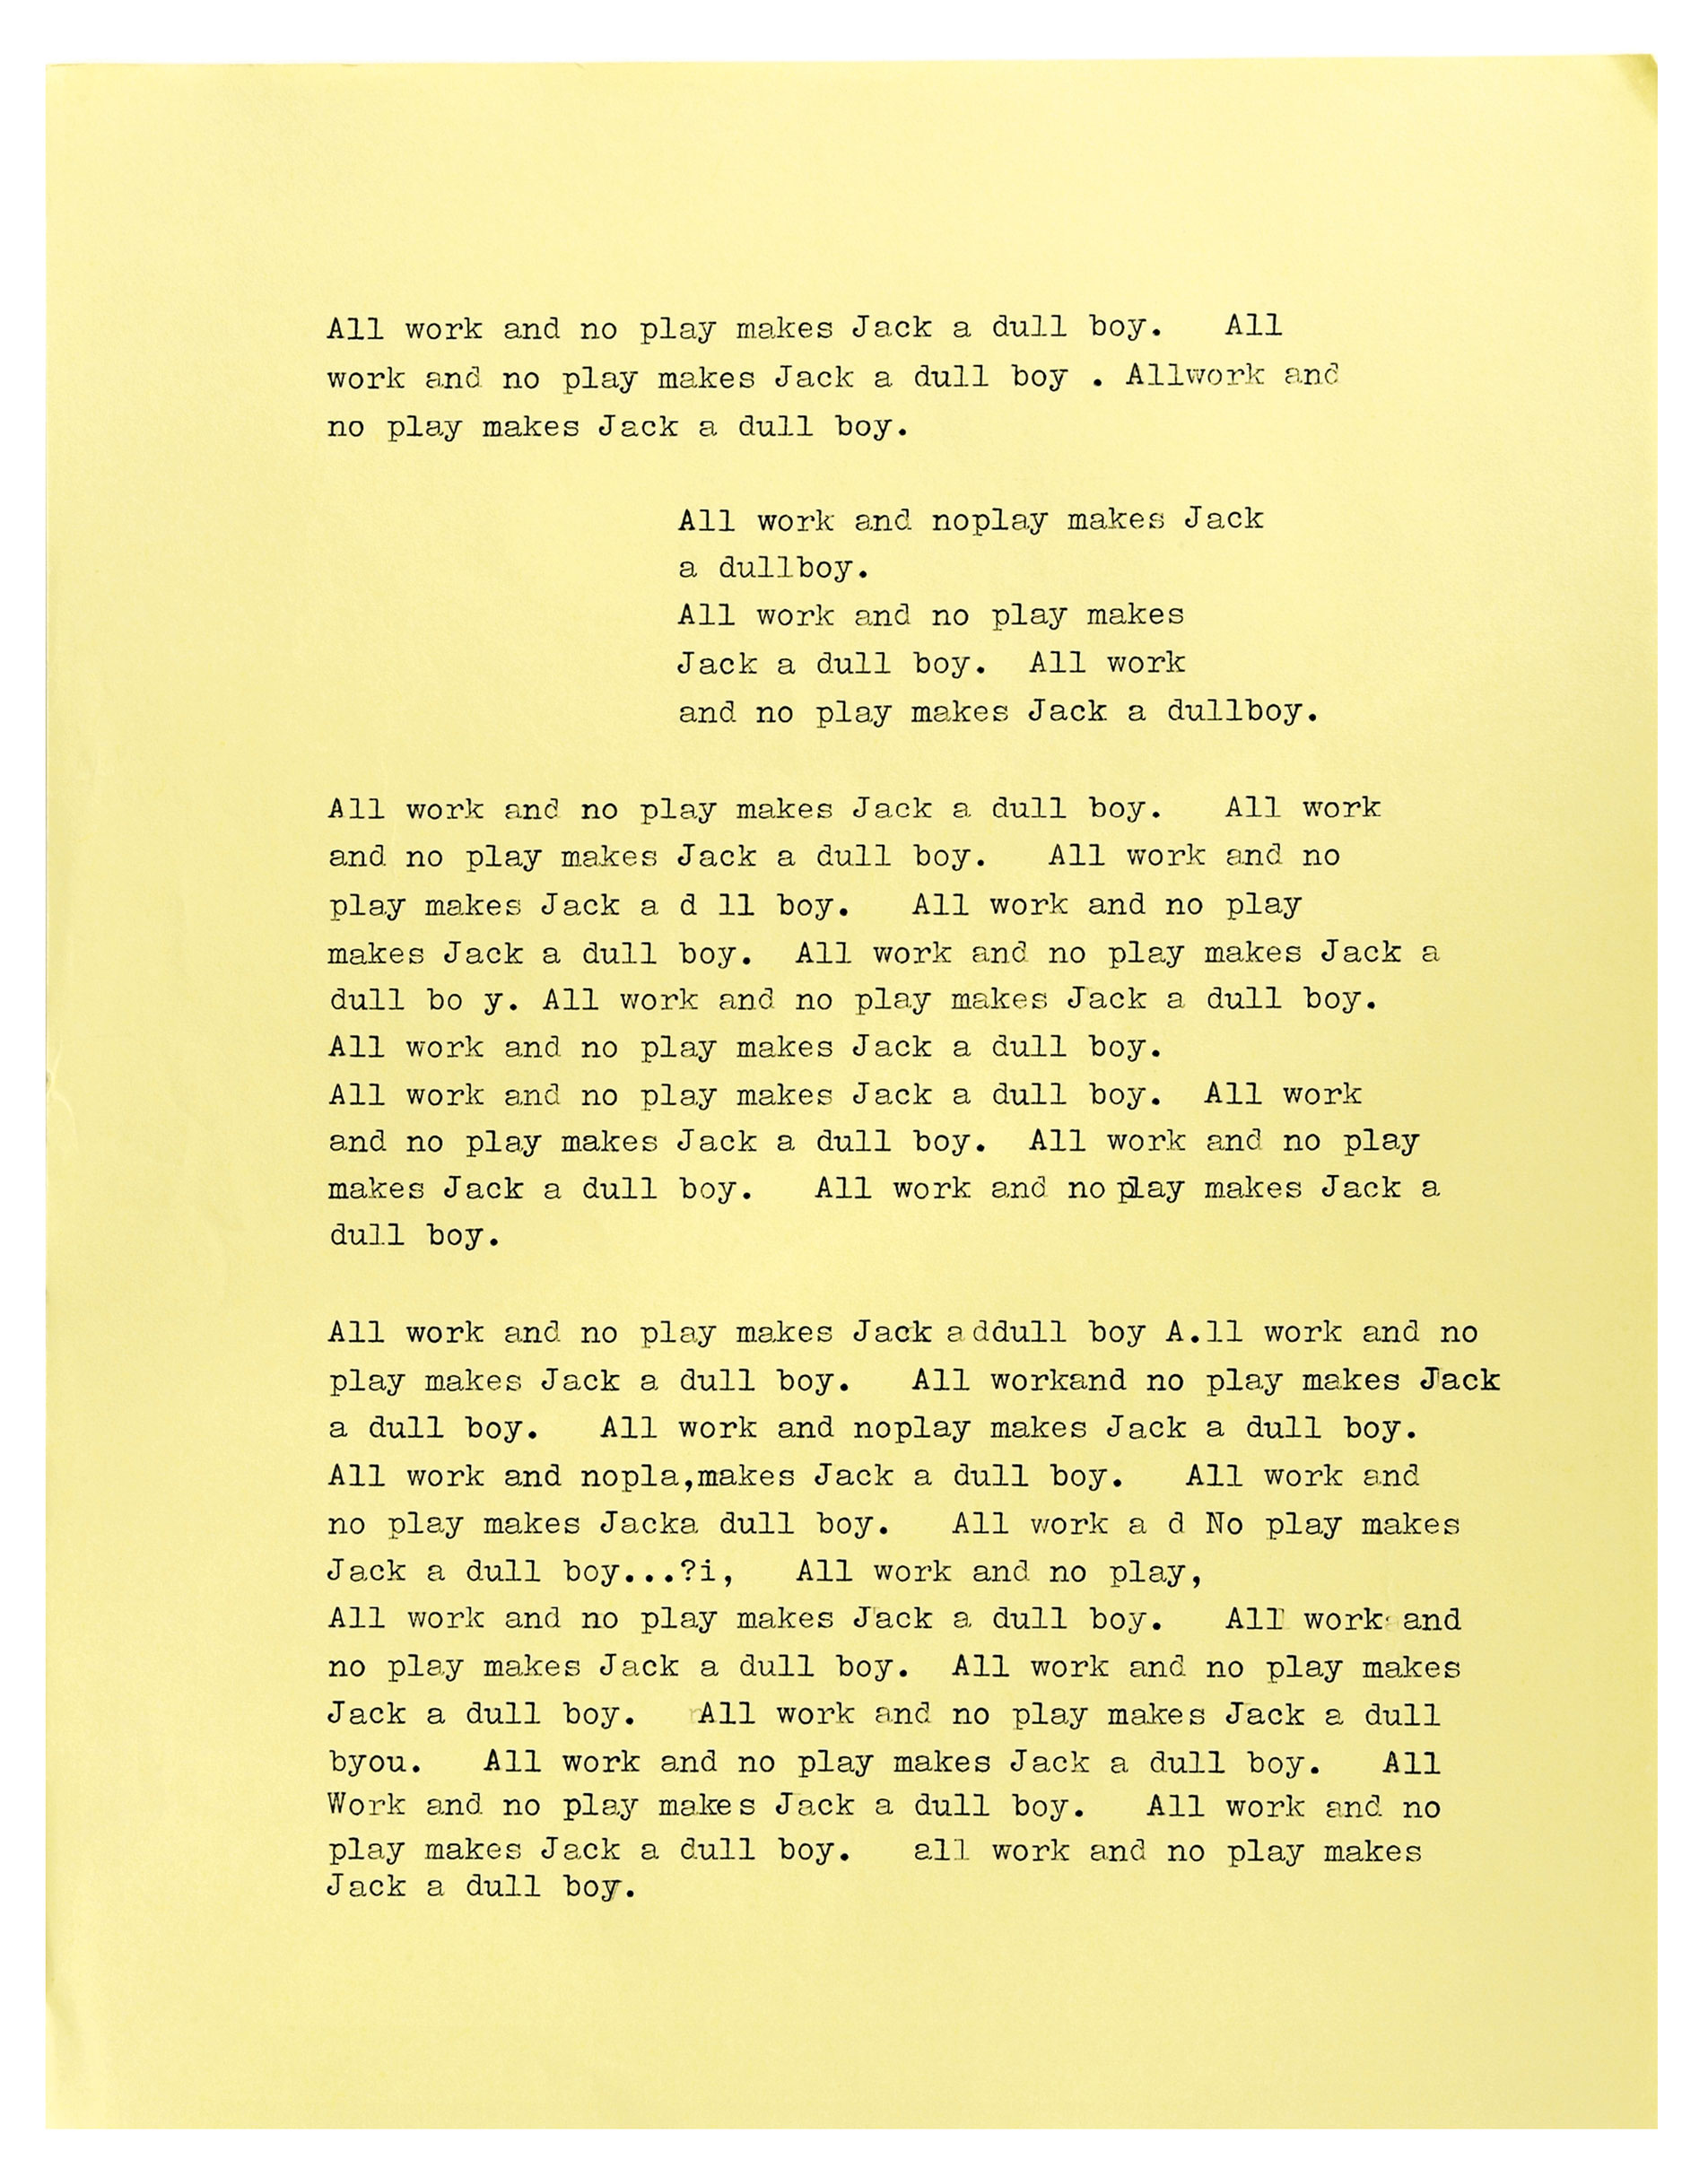 A scan of one of the manuscript pages used in Stanley Kubrick’s 1980 film The Shining. The page shows the quotation “All work and no play makes Jack a dull boy” typed over and over again. 